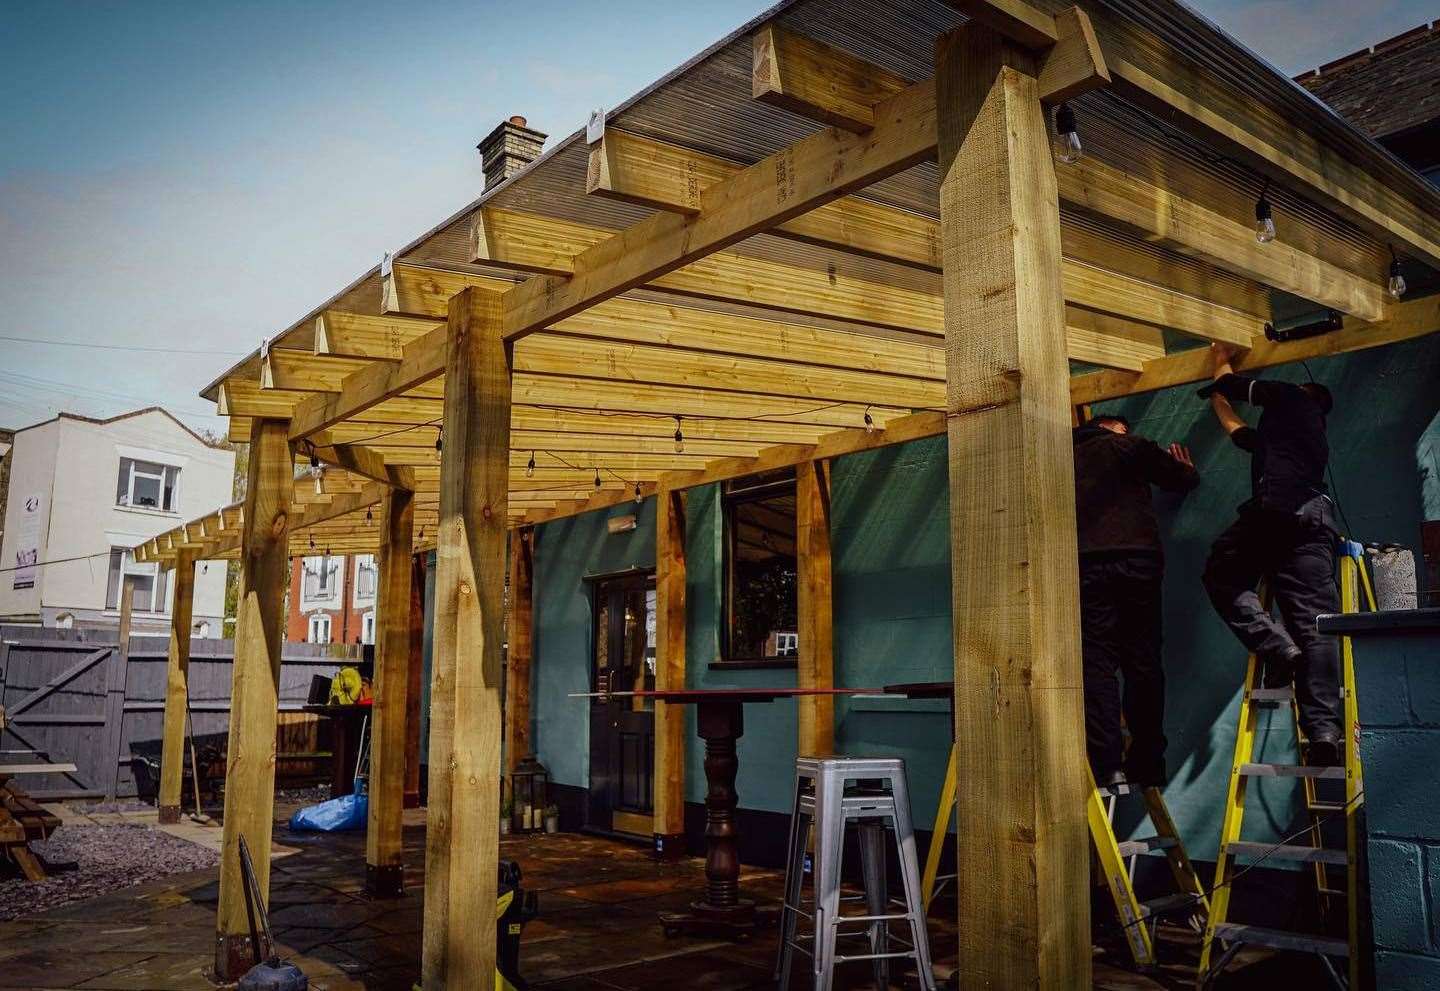 A new outdoor bar has been added to the backstreet boozer